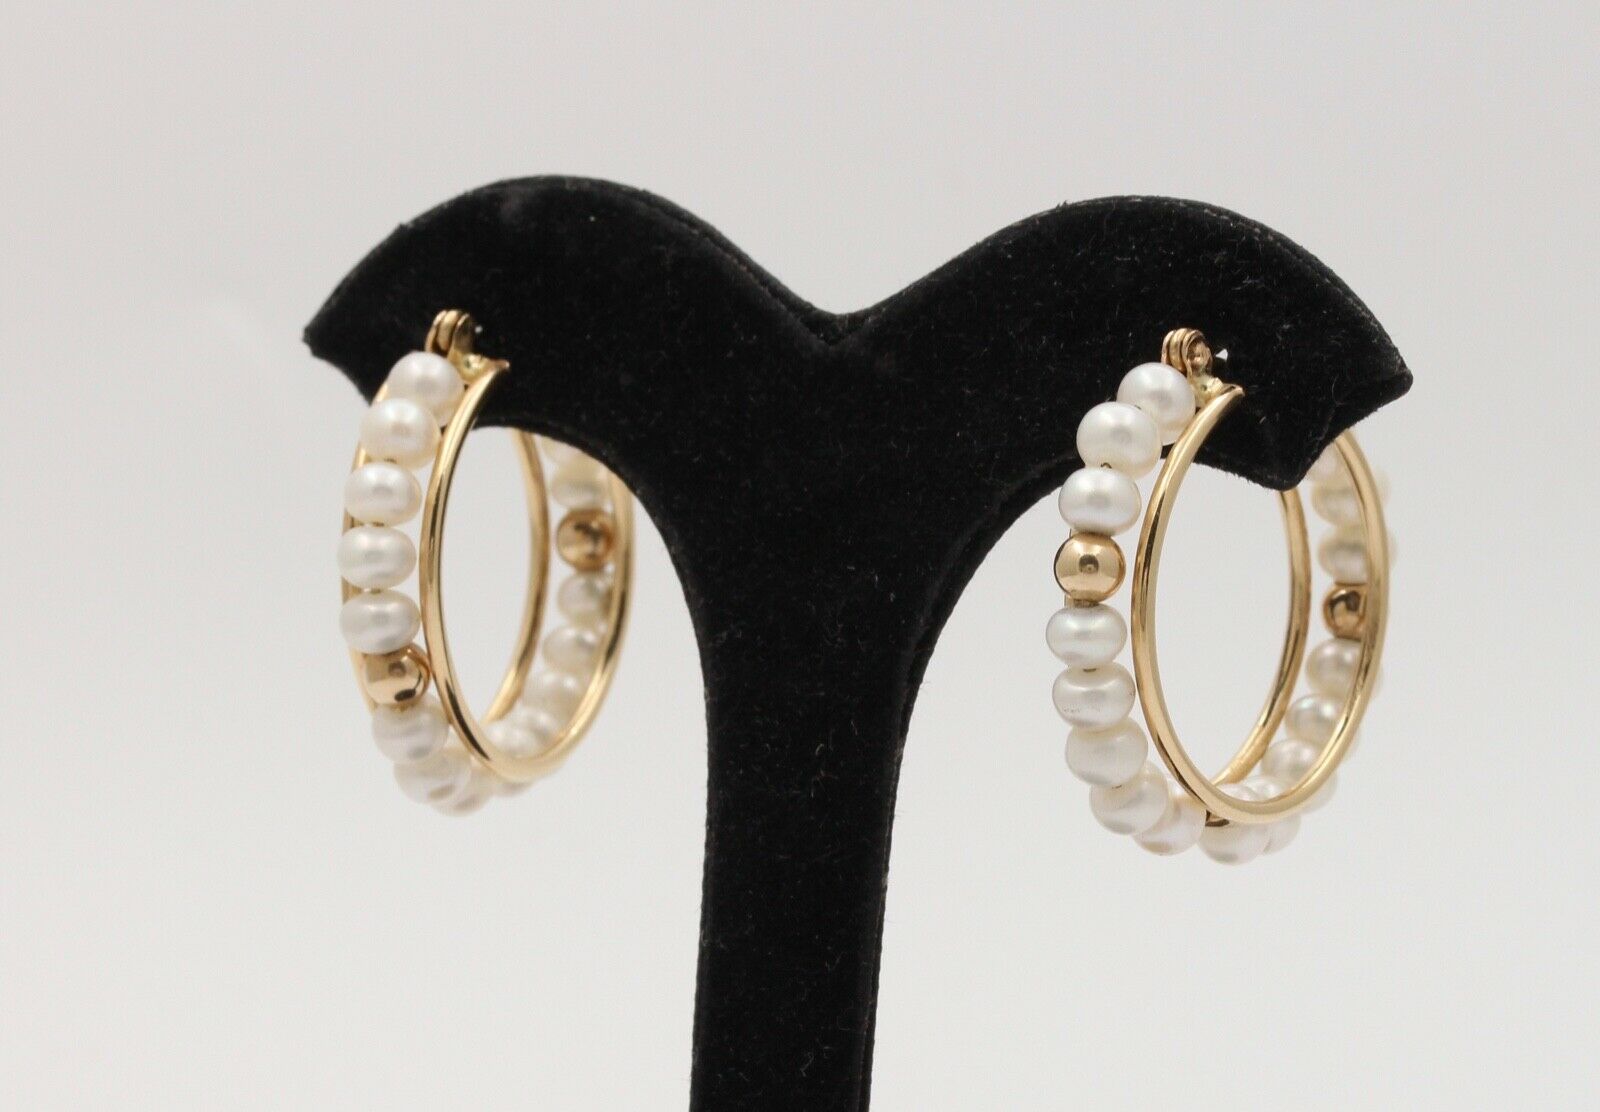 Yellow Gold Cultured Pearl Earrings